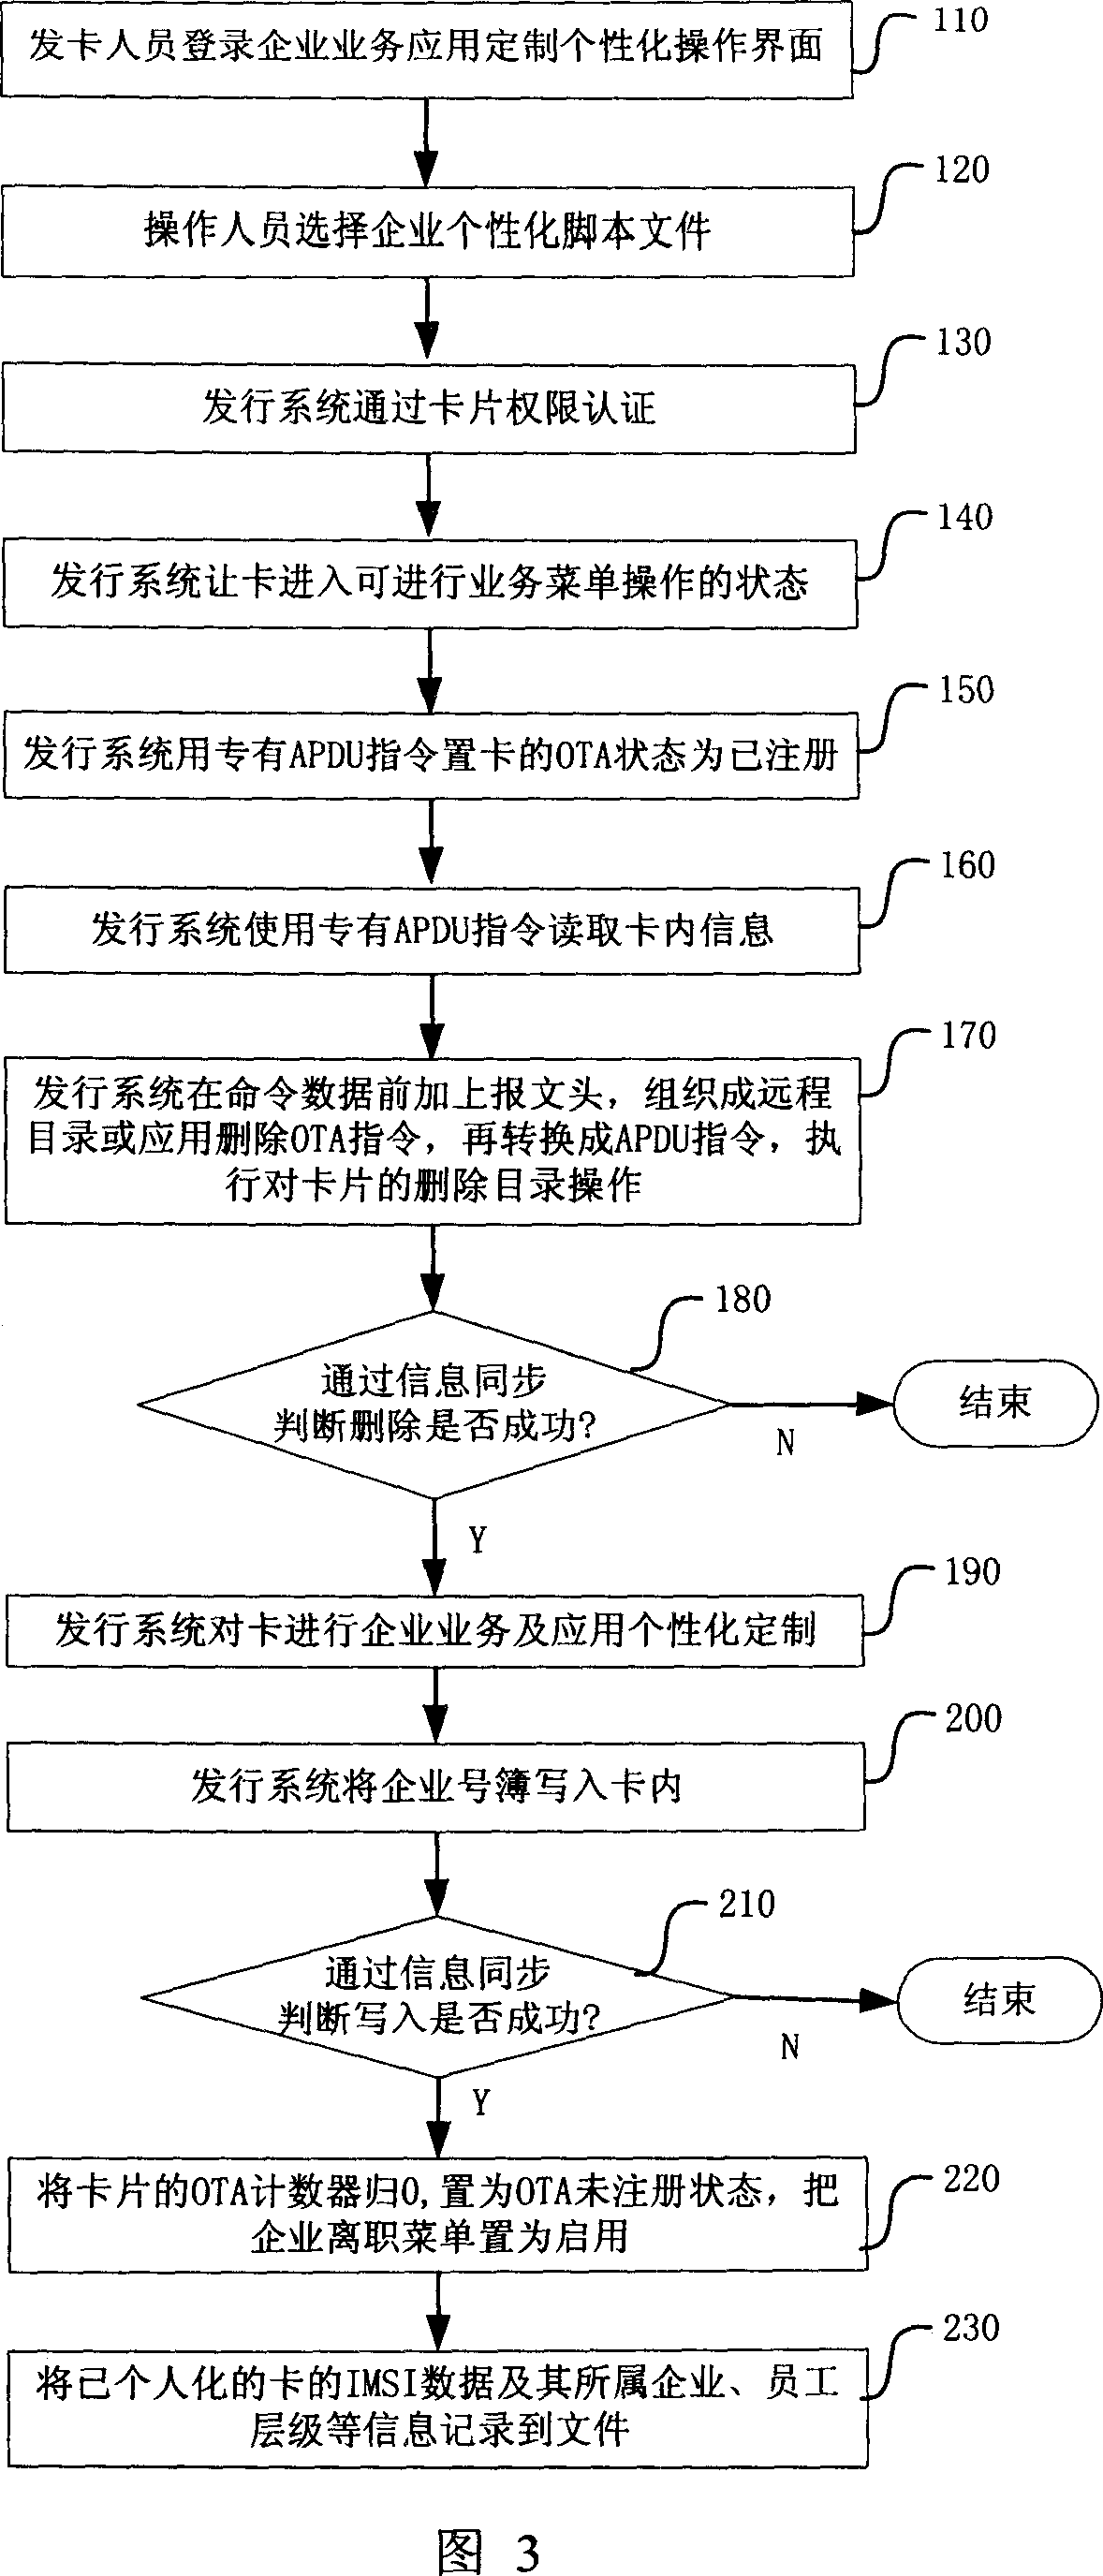 User identifying module service and method and system for using personalized tailered issuing